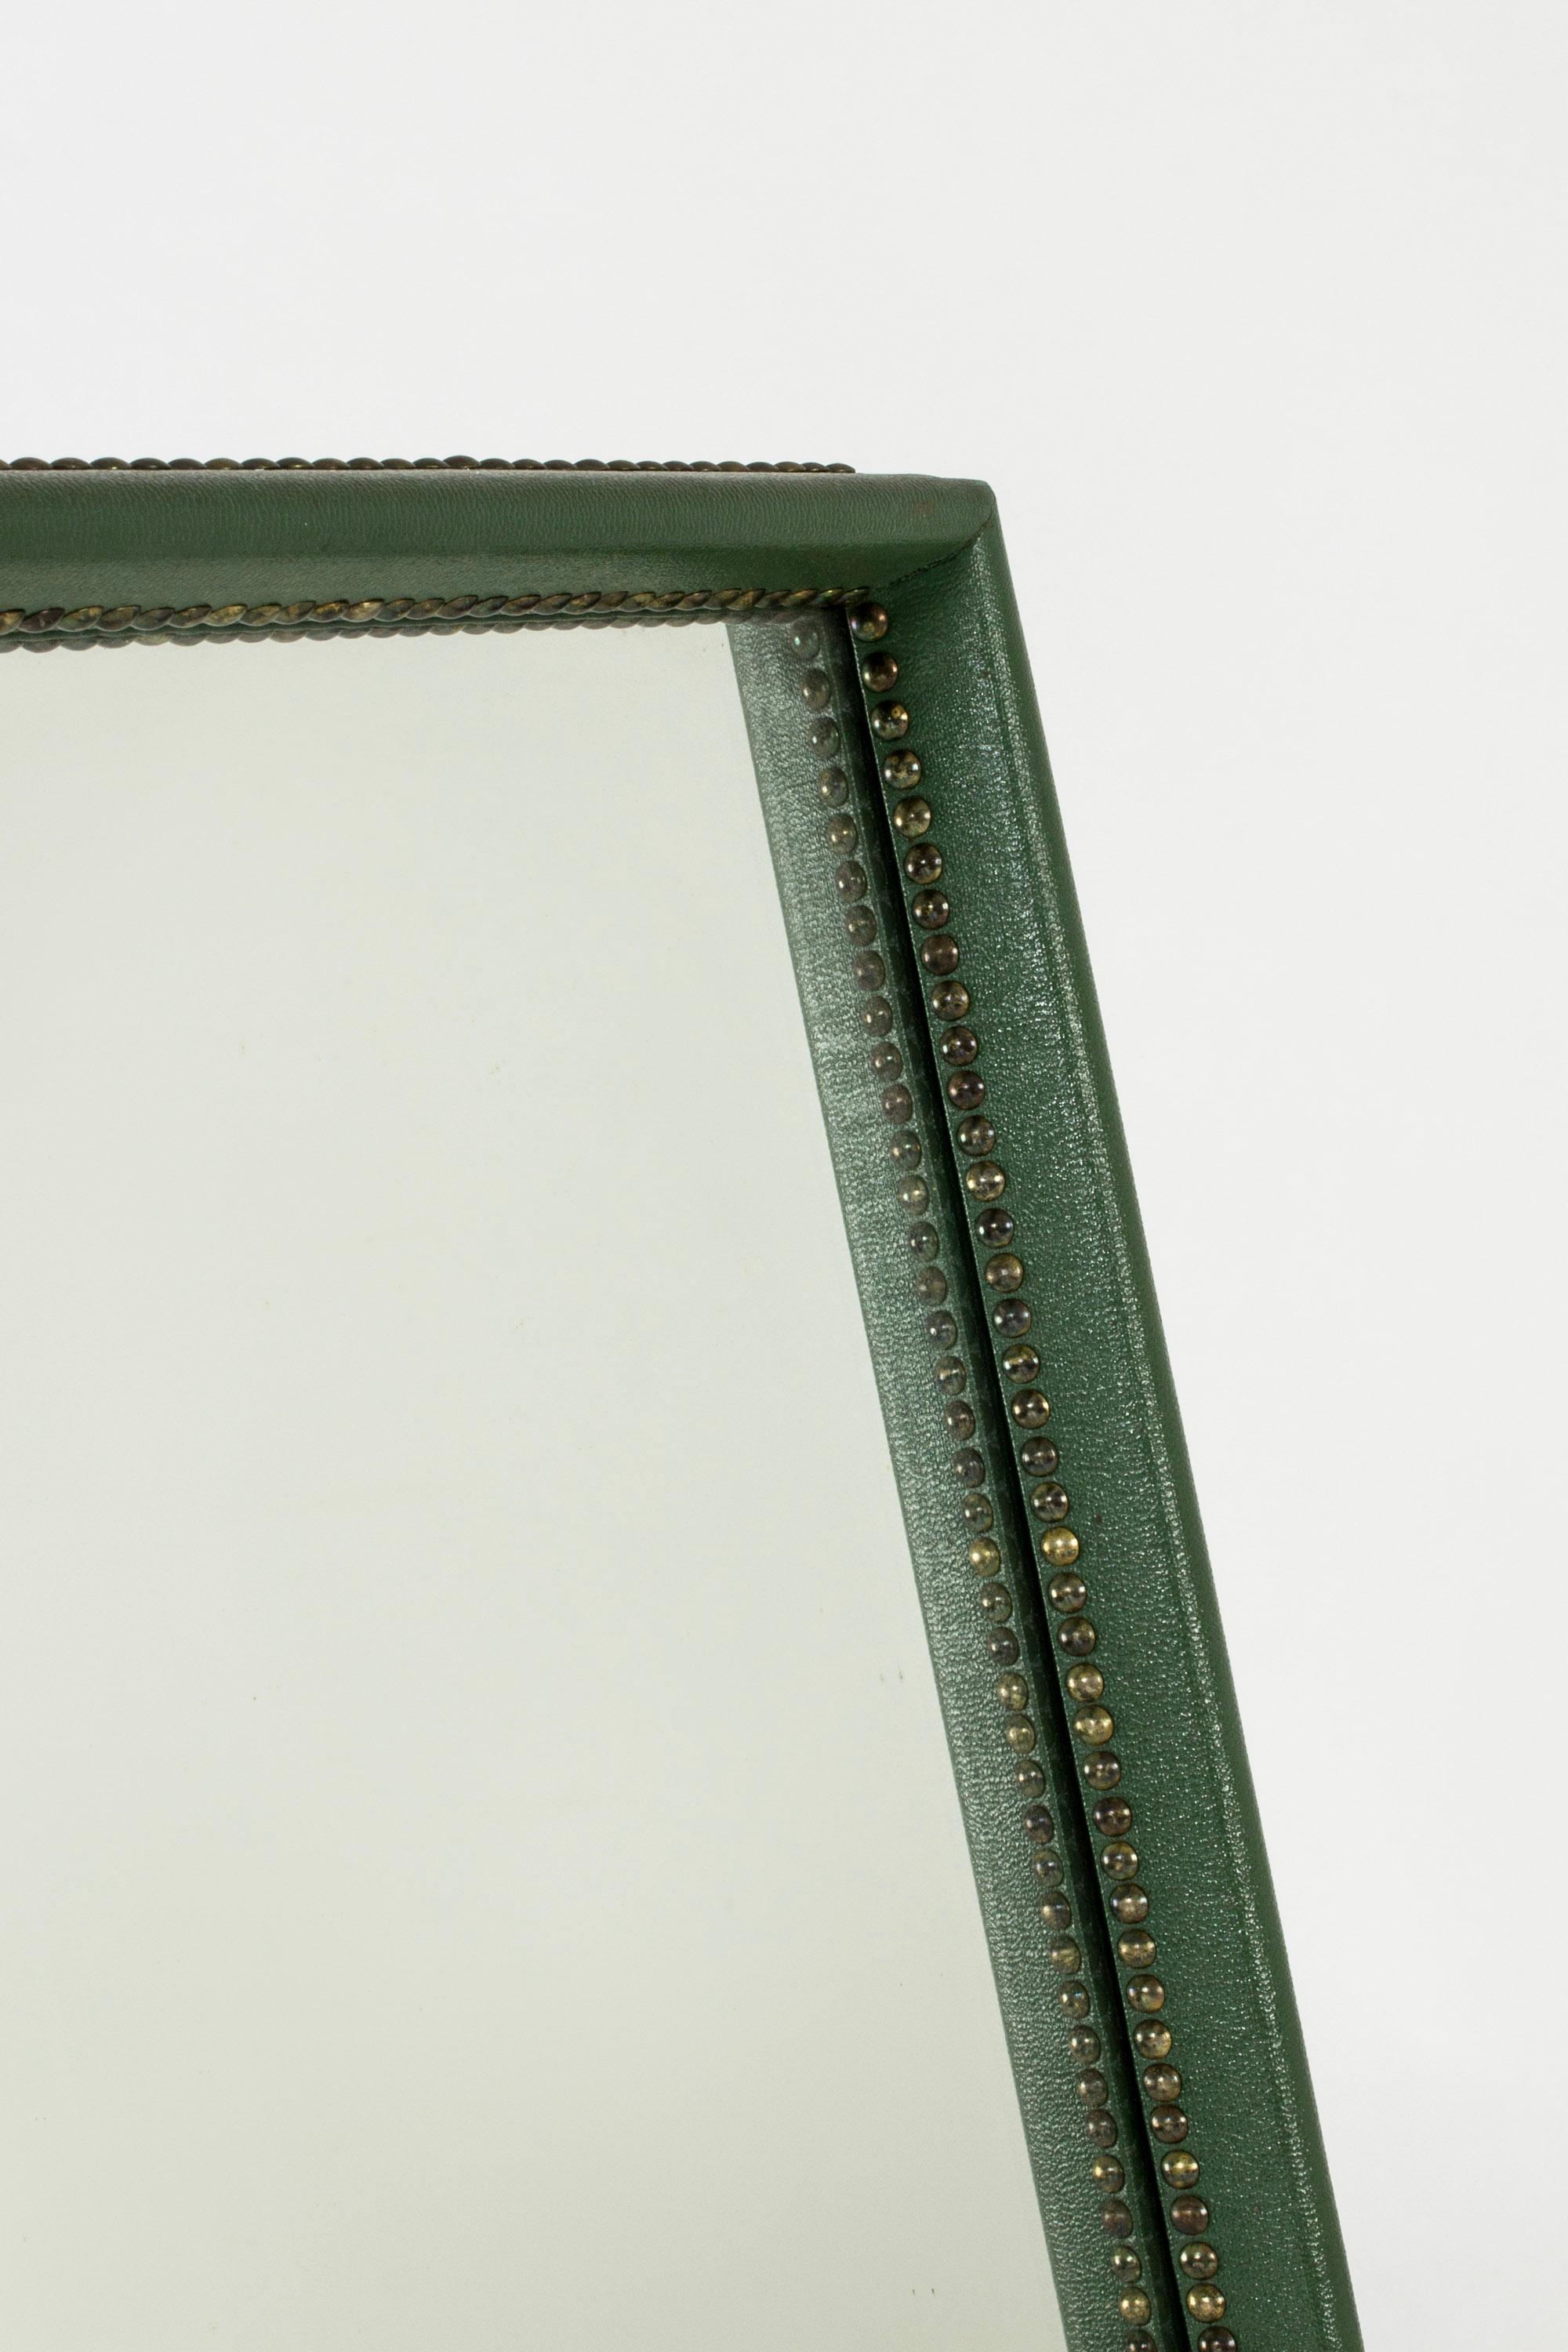 Elegant wall mirror by Otto Schulz. Frame dressed in dark green faux leather, decorated around the inner and outer edges with numerous brass nails.